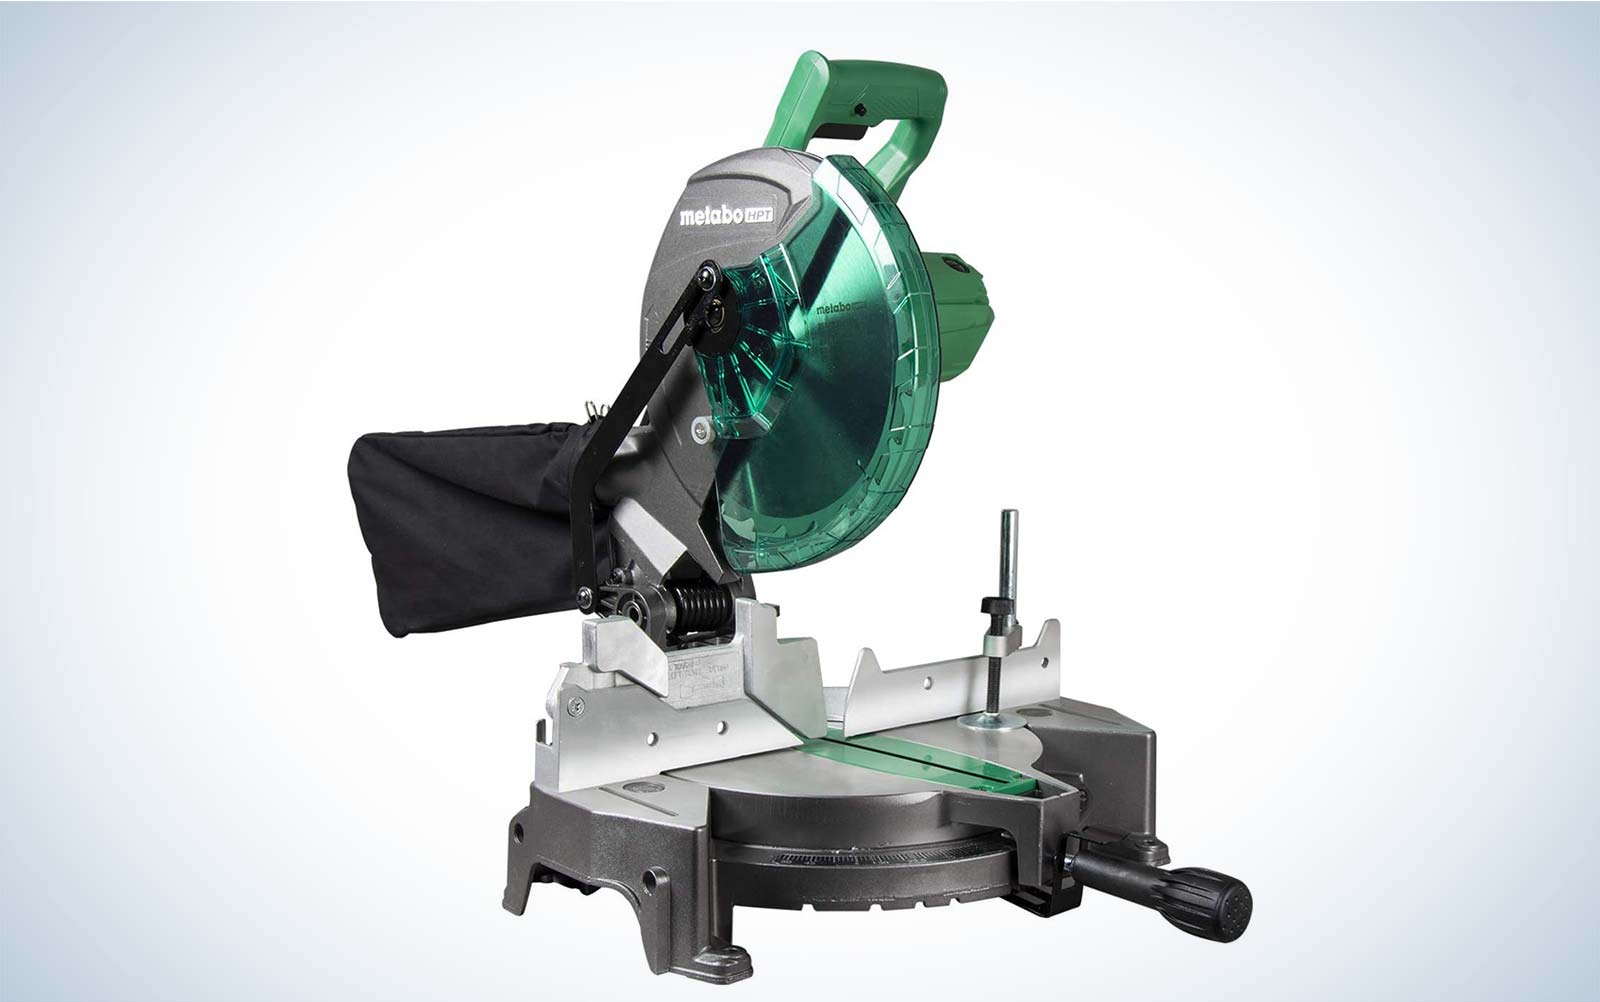 Metabo HPT C10FCGS 10-Inch Compound Miter Saw not running on a plain background